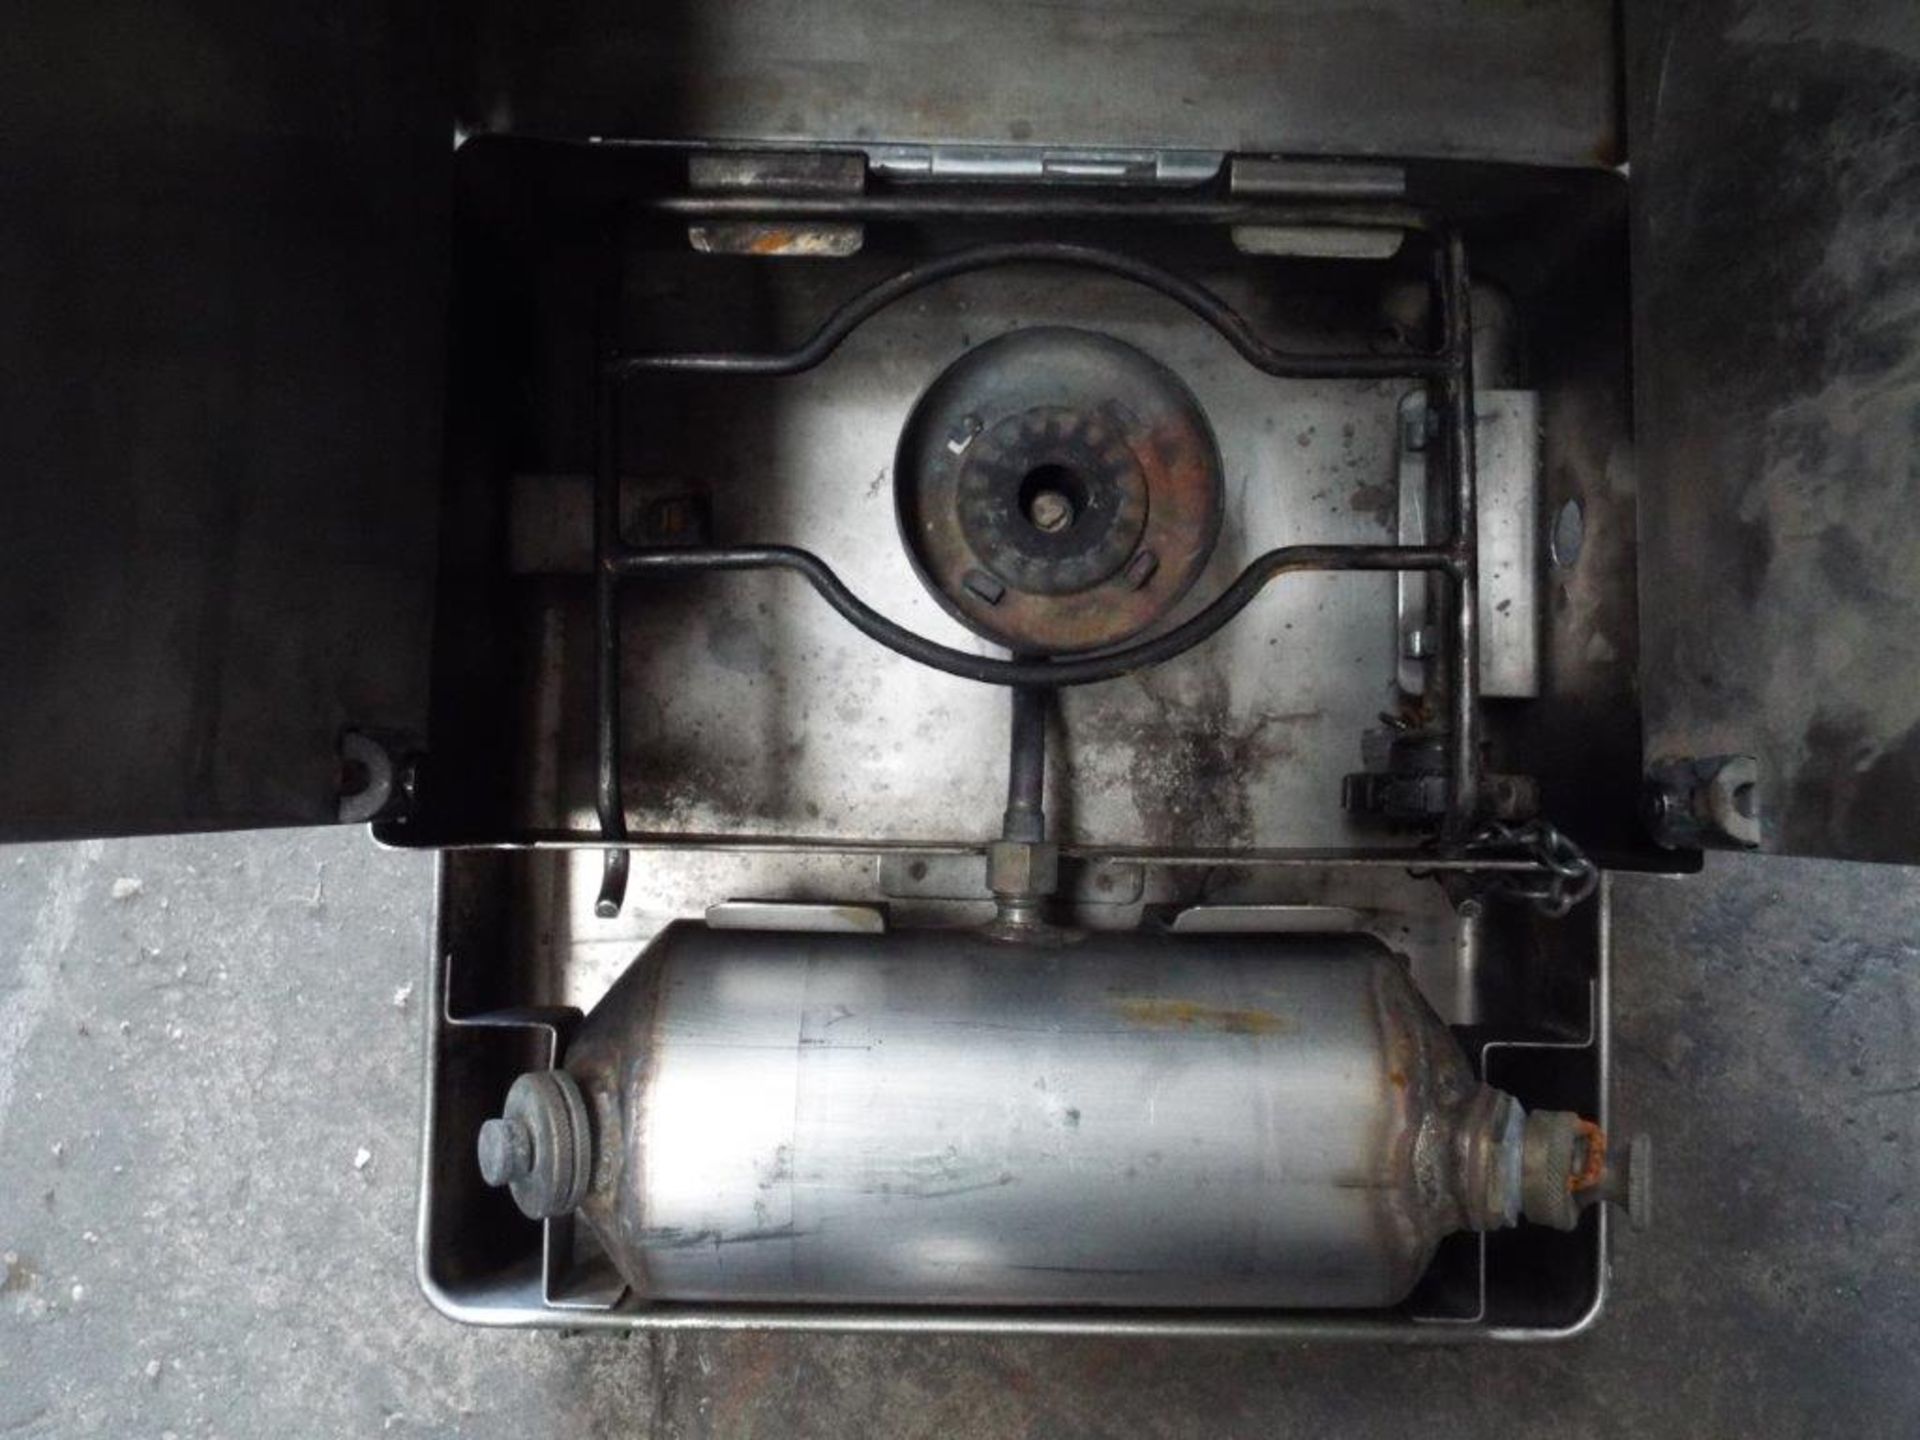 No. 12 Stove, Diesel Cooker/Camping Stove - Image 3 of 6